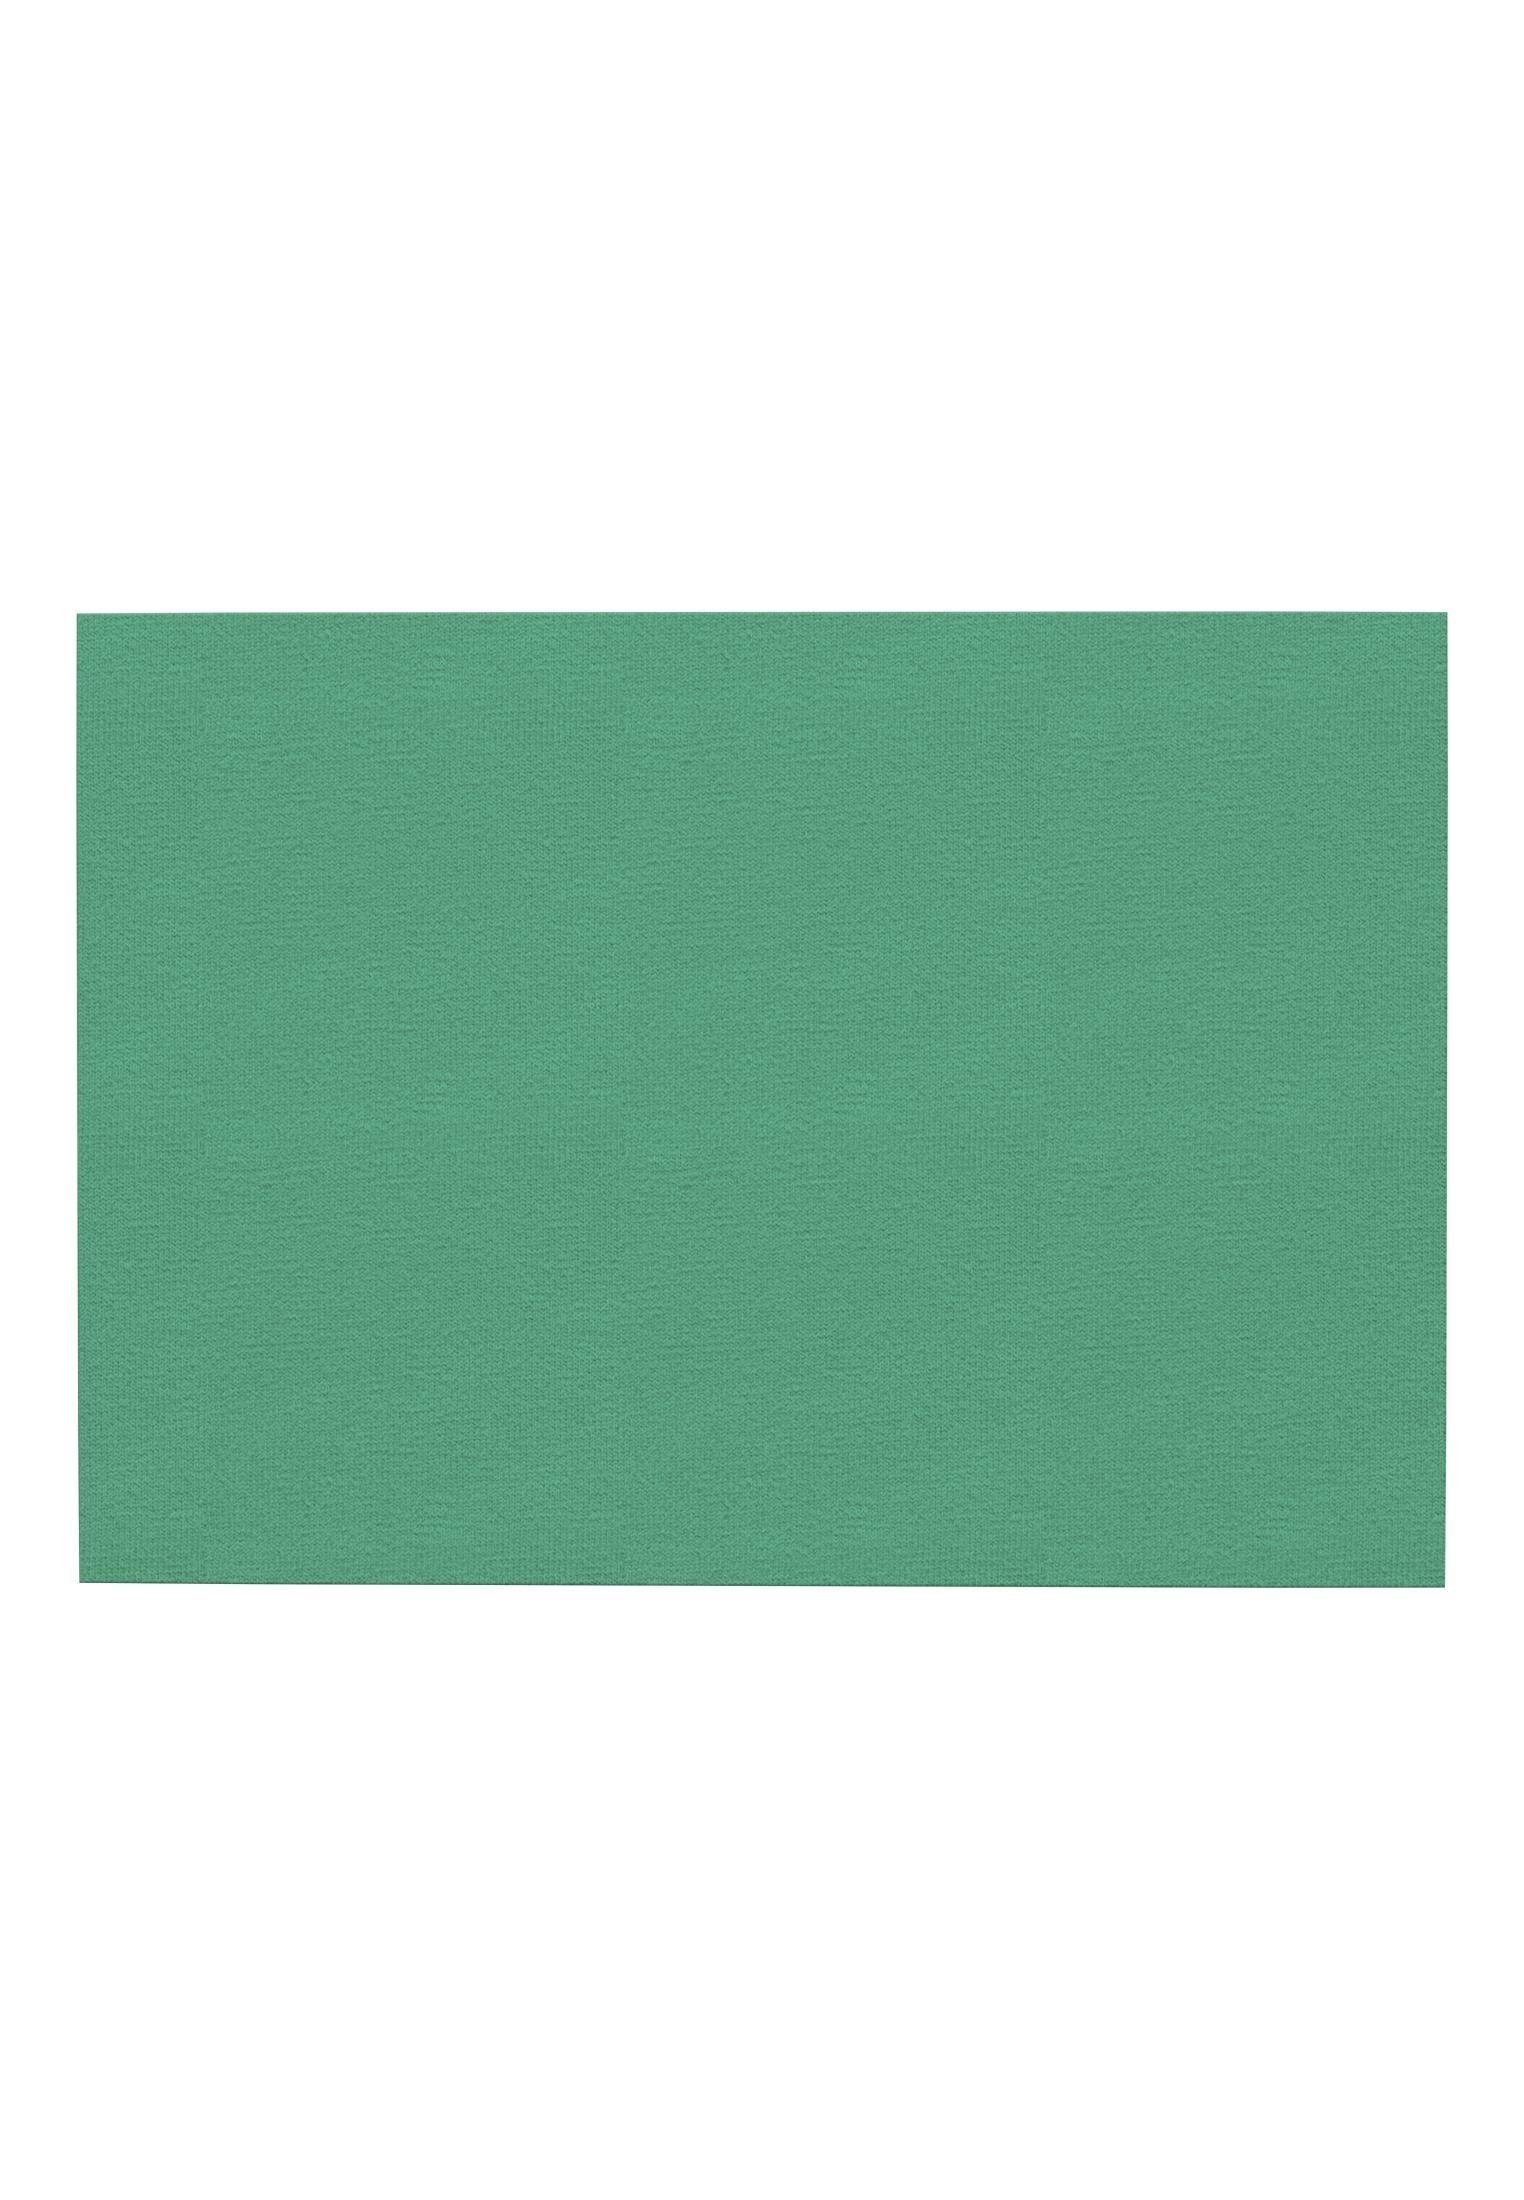 Slip NKMBOXER It (2-St) Name 2P green spruce